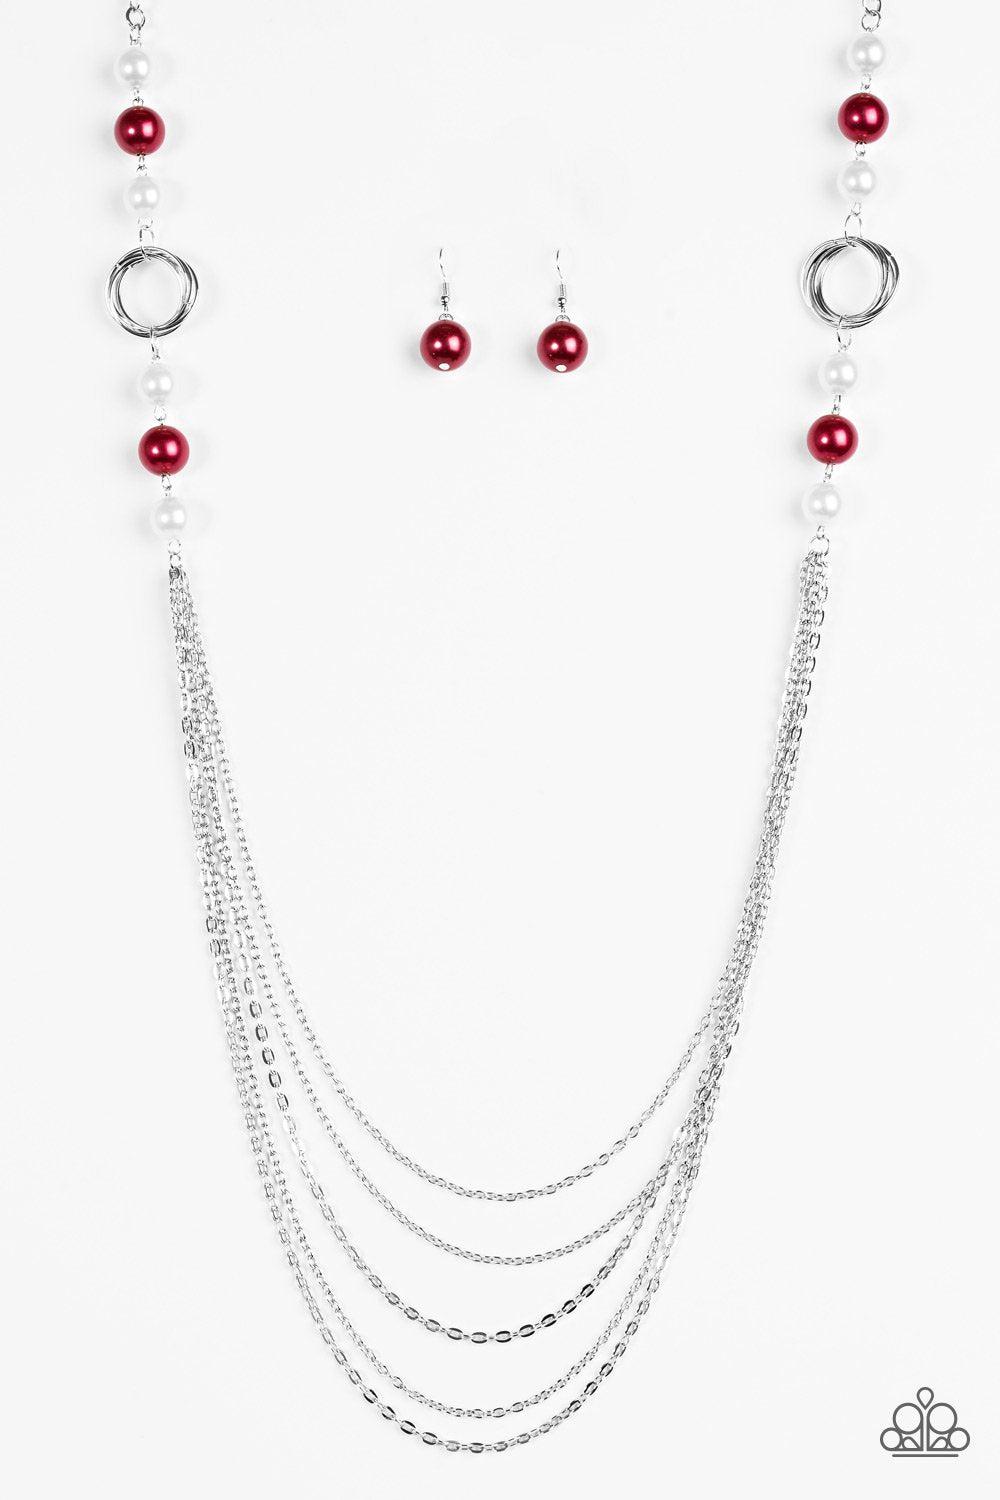 Pour The Wine Red, White and Silver Necklace - Paparazzi Accessories-CarasShop.com - $5 Jewelry by Cara Jewels